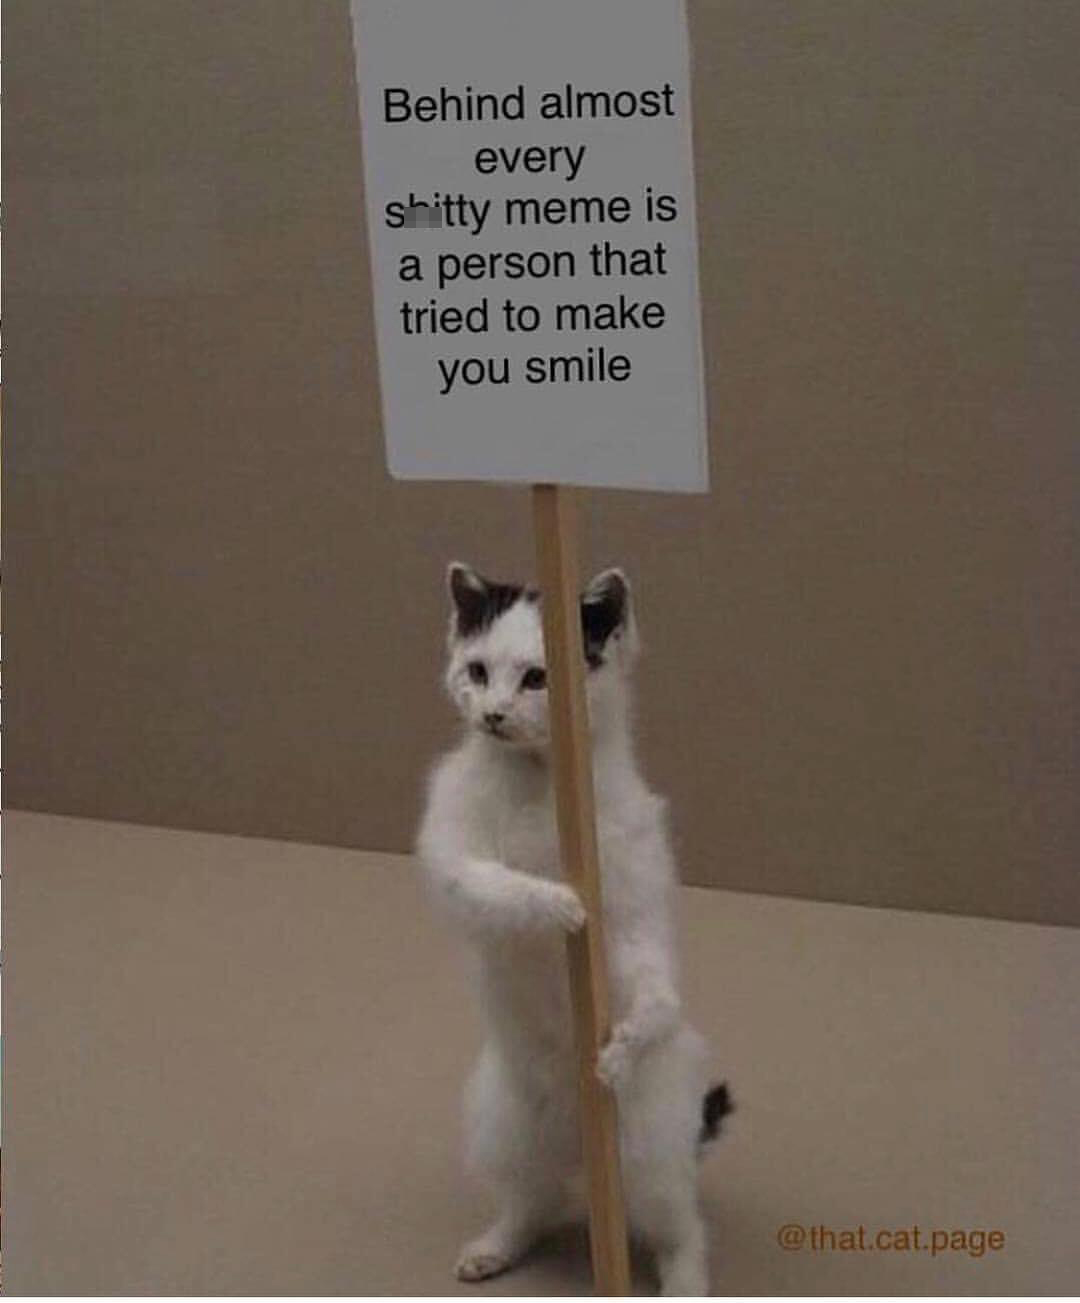 funny memes - cat holding im dead sign - Behind almost every shitty meme is a person that tried to make you smile .cat.page